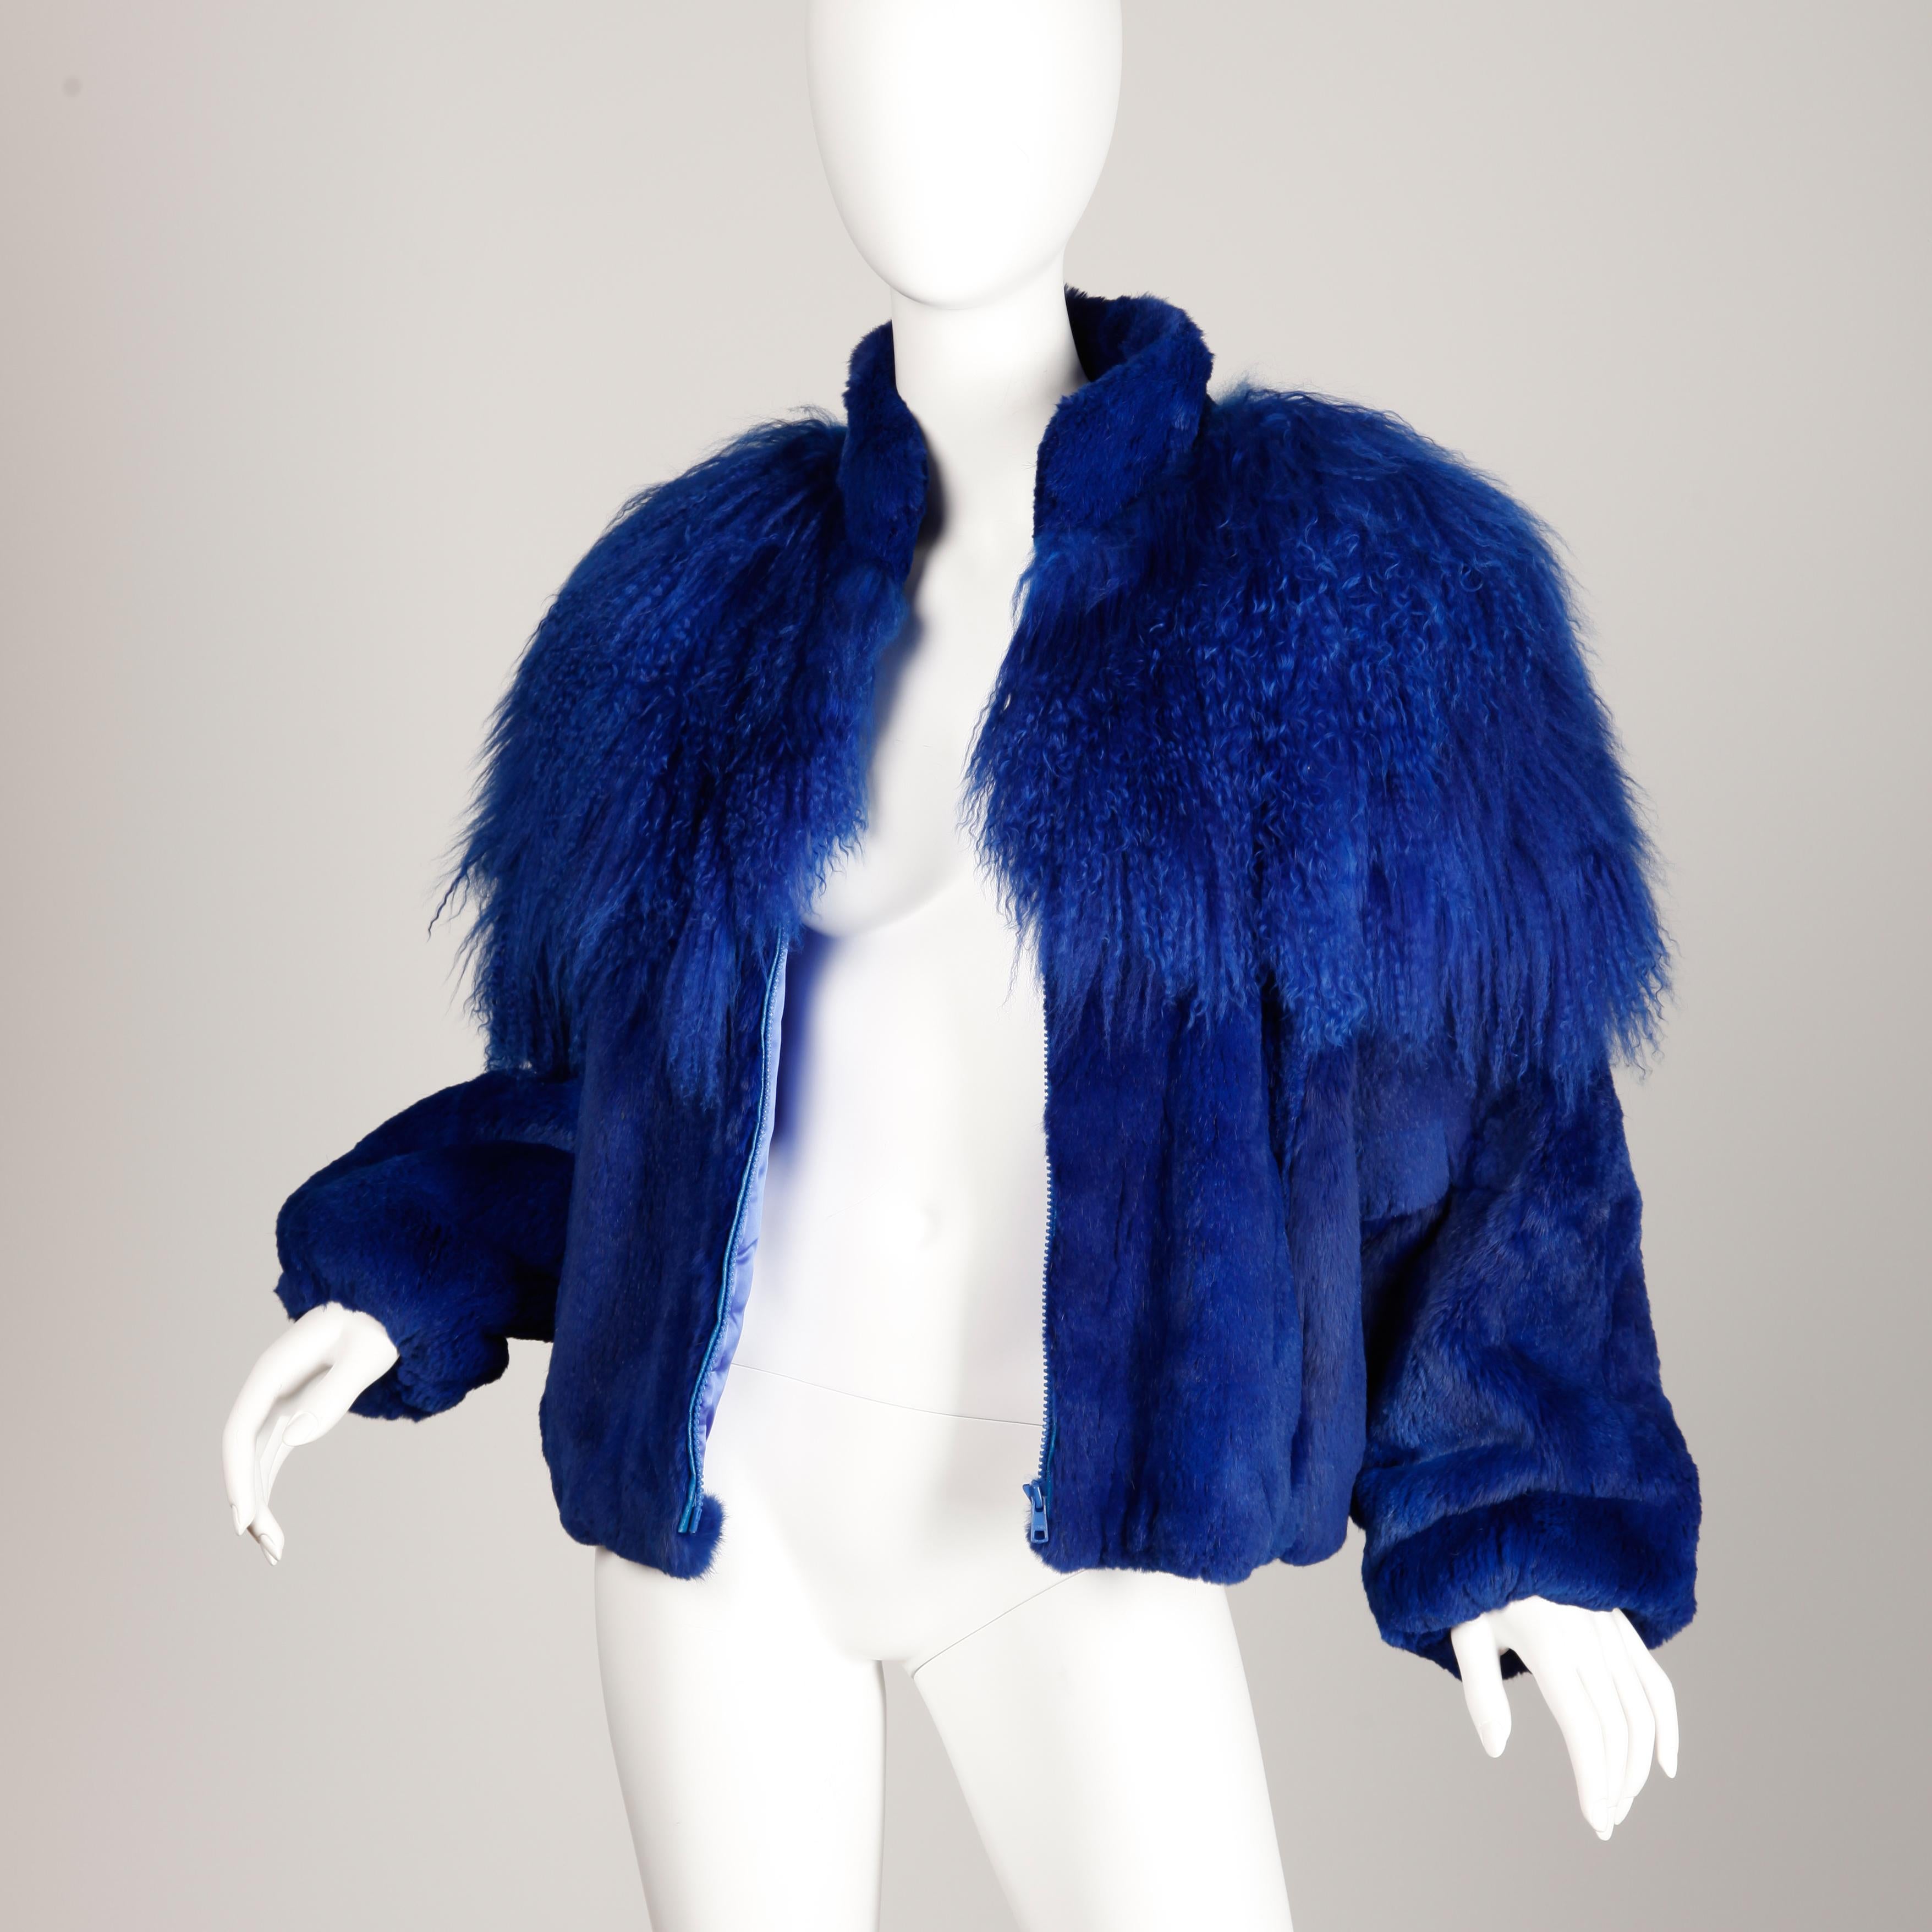 Vintage 1980s dyed cobalt blue fur bomber jacket in sheared rabbit and Mongolian lamb by Élan from the estate of Pamela Lewis (Jerry Lewis/ Gary Lewis). Fully lined with front zip closure. Elastic sleeve cuffs and waistband. The marked size is